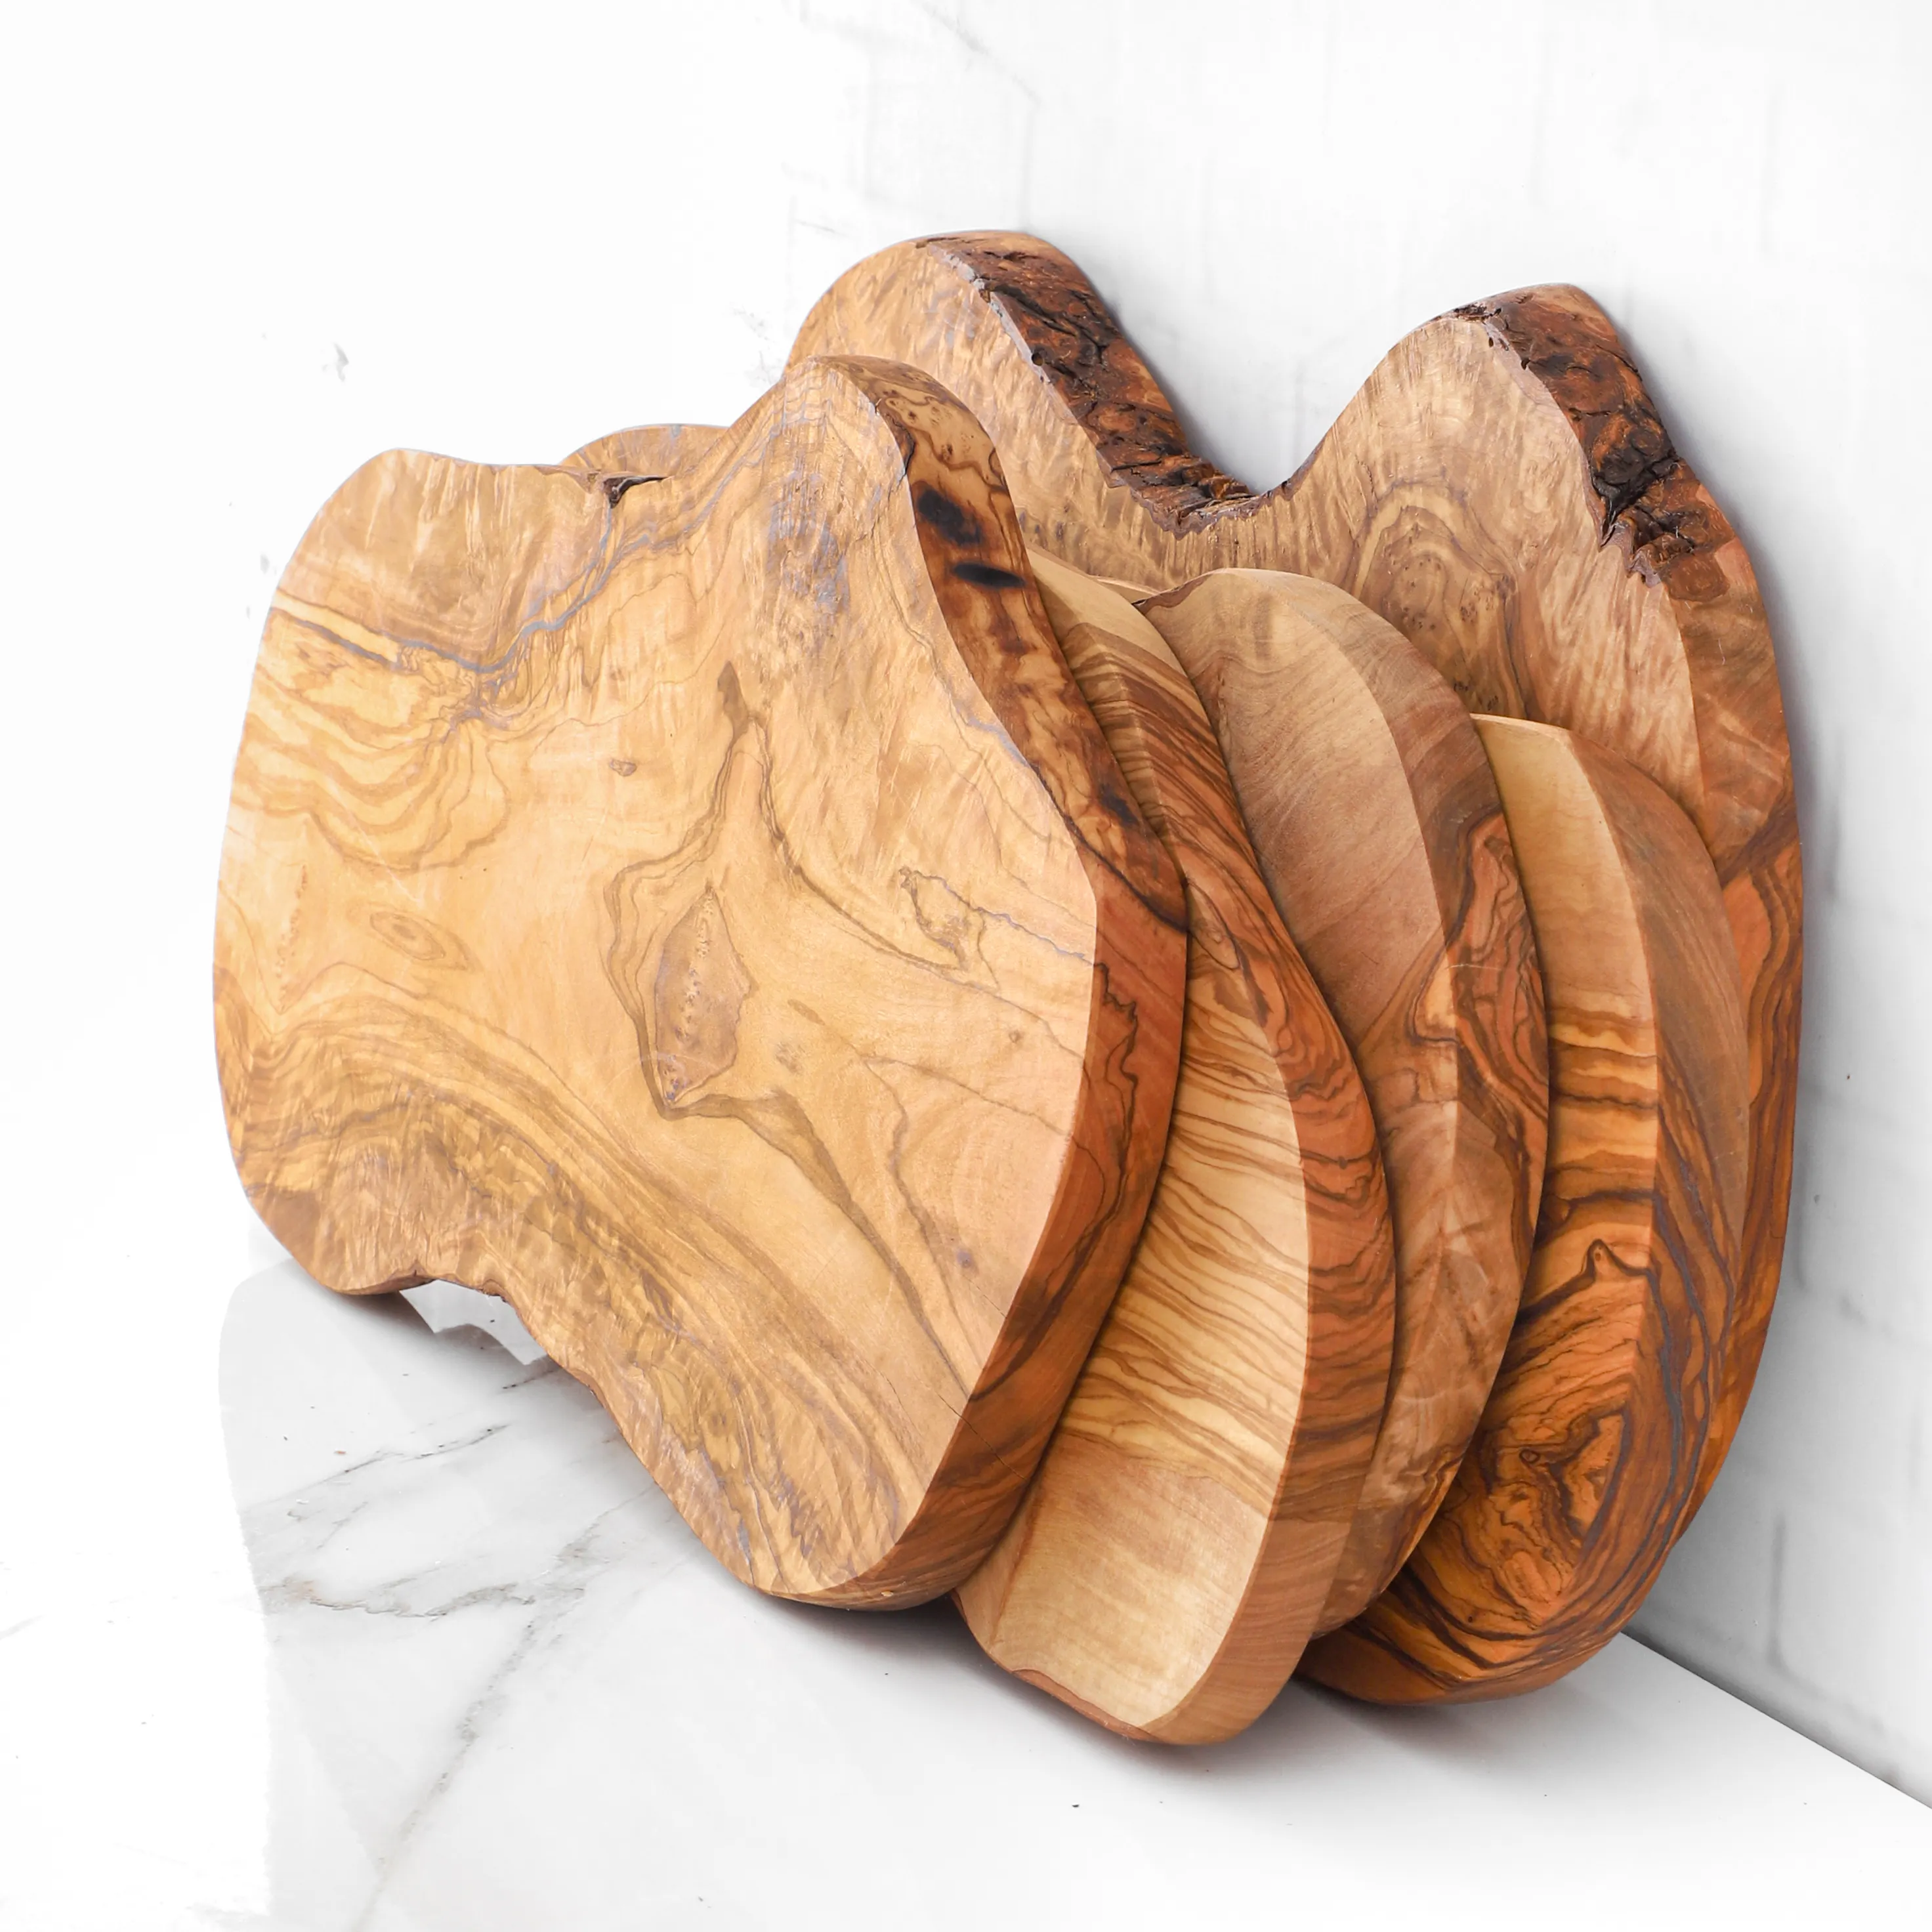 Chopping Board Handmade from Olive Wood / Wooden Chopping Board / Chopping Board Wooden